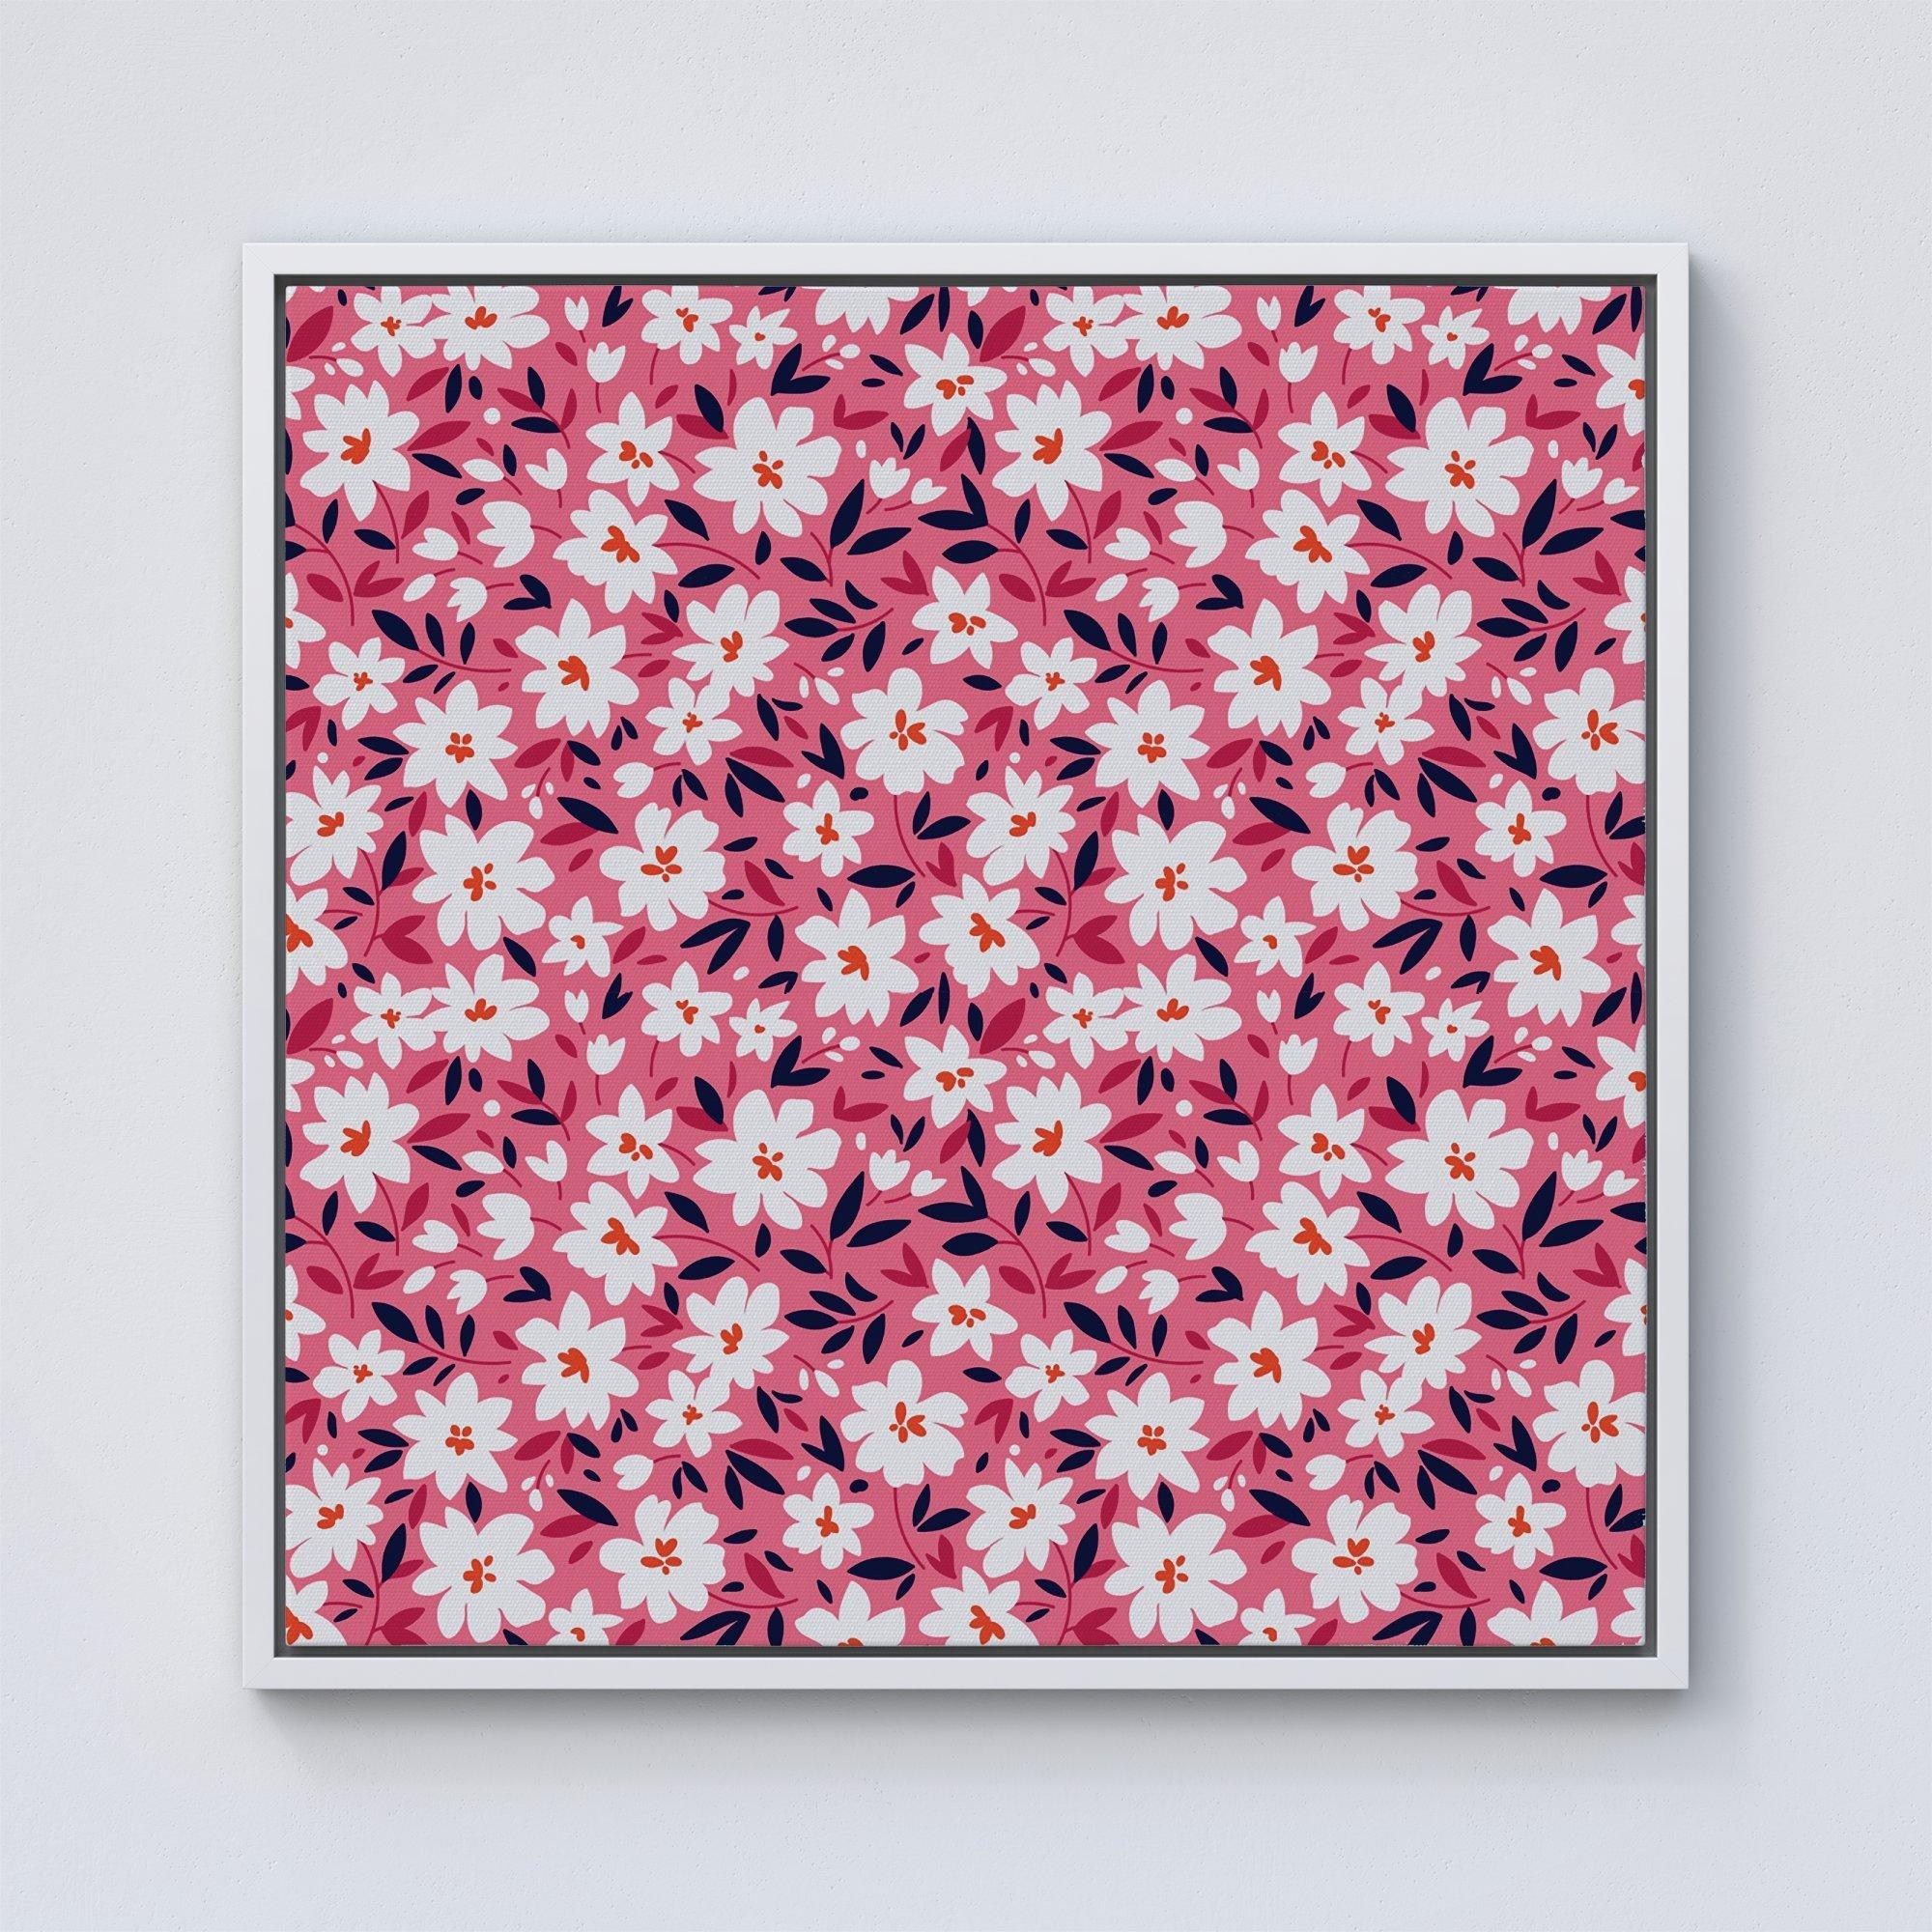 Small Cute White Flower Pattern Framed Canvas